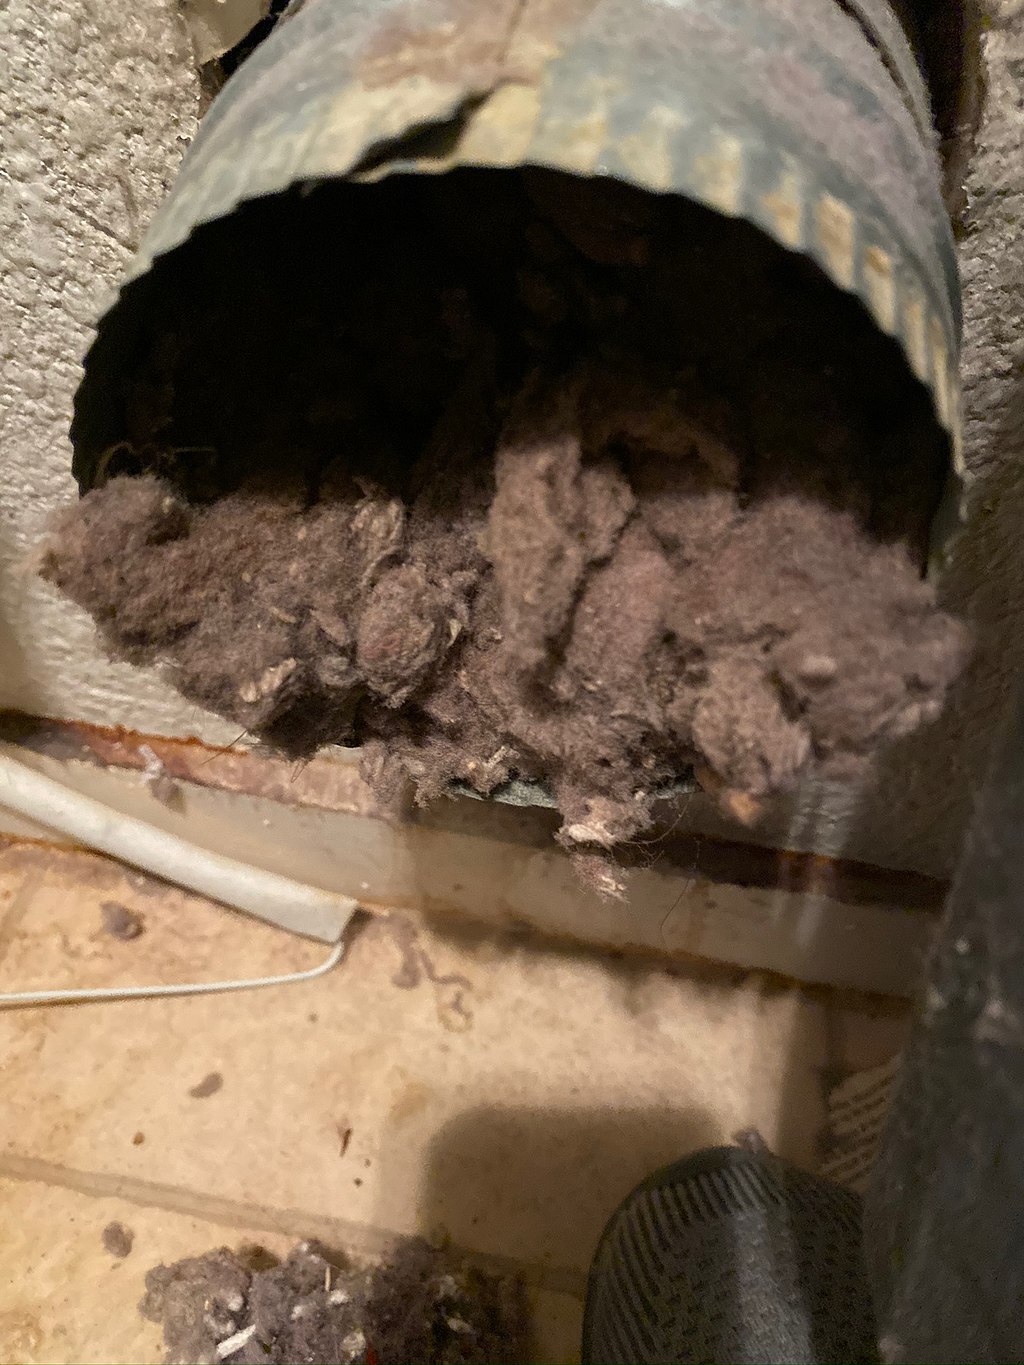 image - Dryer Vent Cleaning Can I handle it